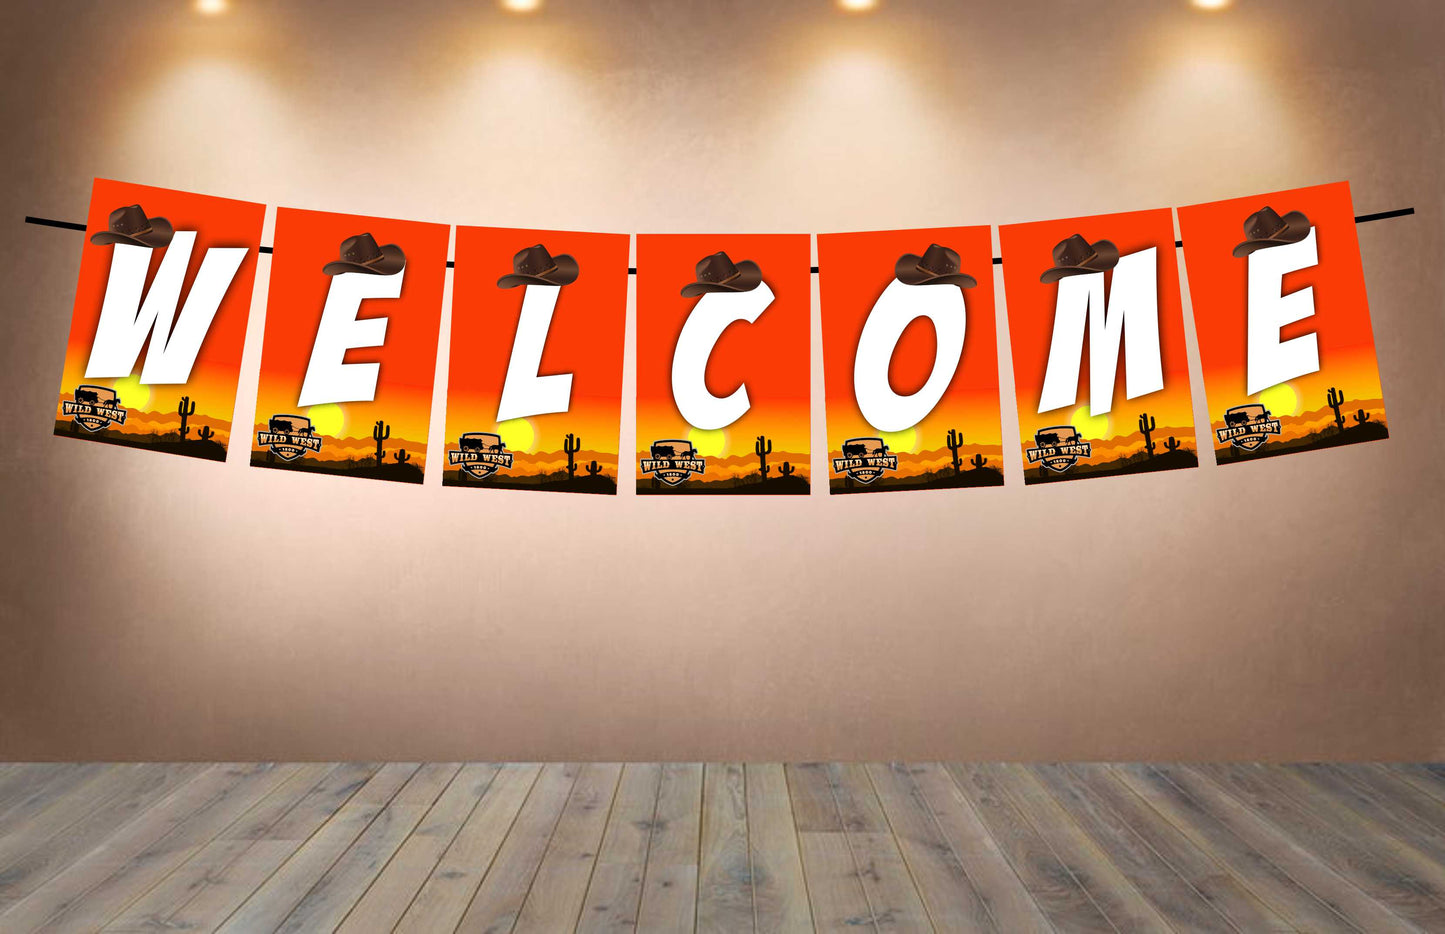 Cowboy Wildwest Theme Welcome Banner for Party Entrance Home Welcoming Birthday Decoration Party Item